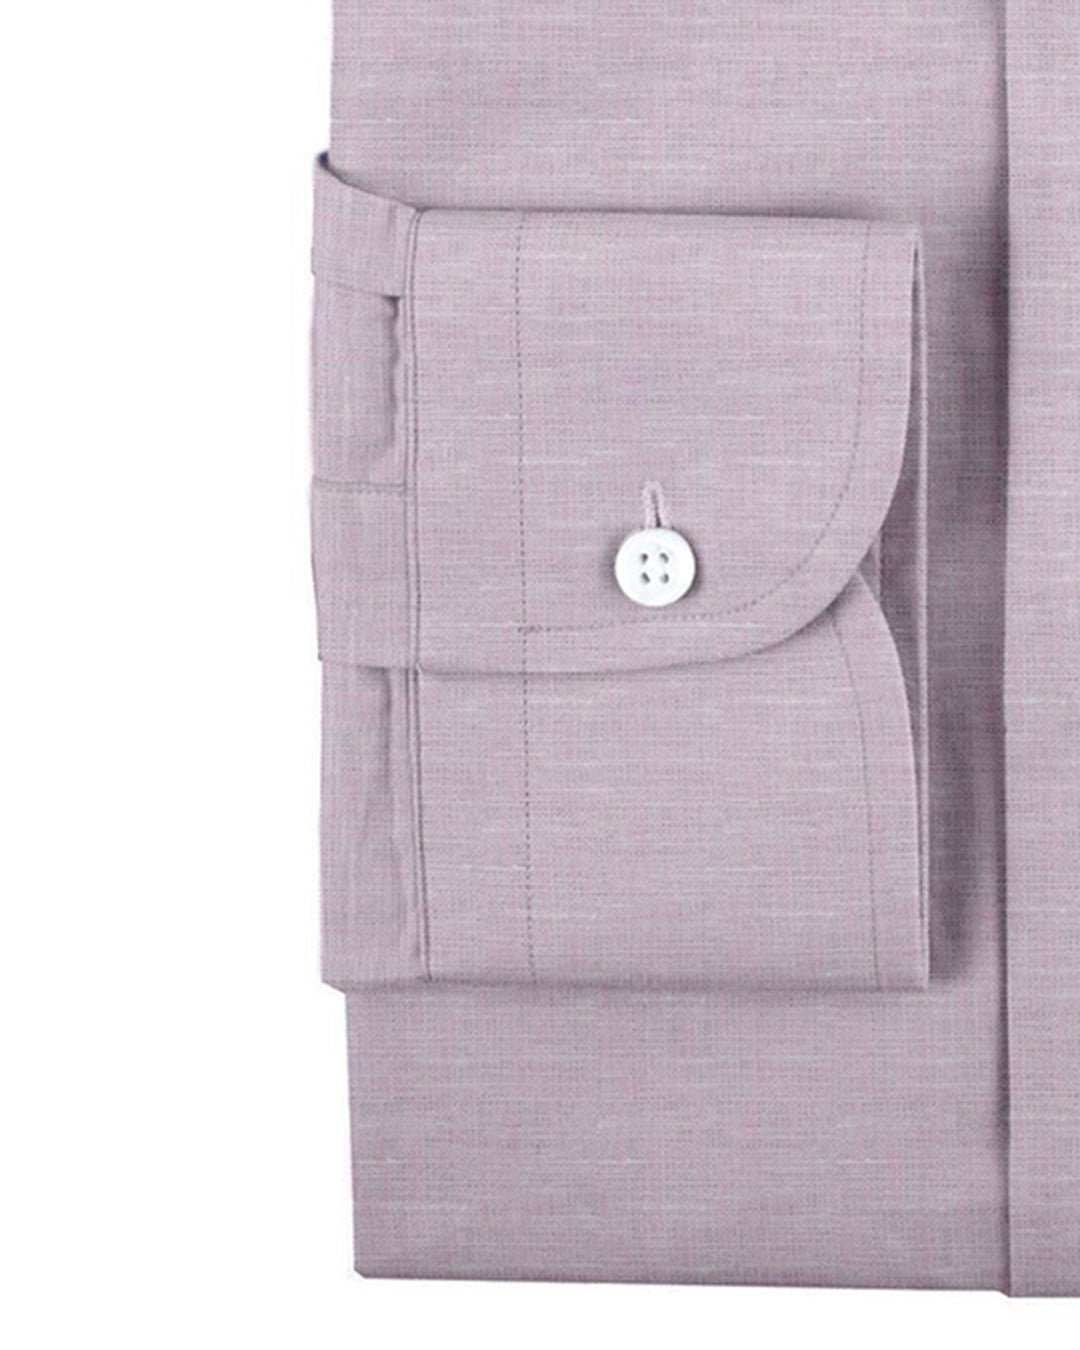 Cuff of the custom linen shirt for men in pale pink by Luxire Clothing